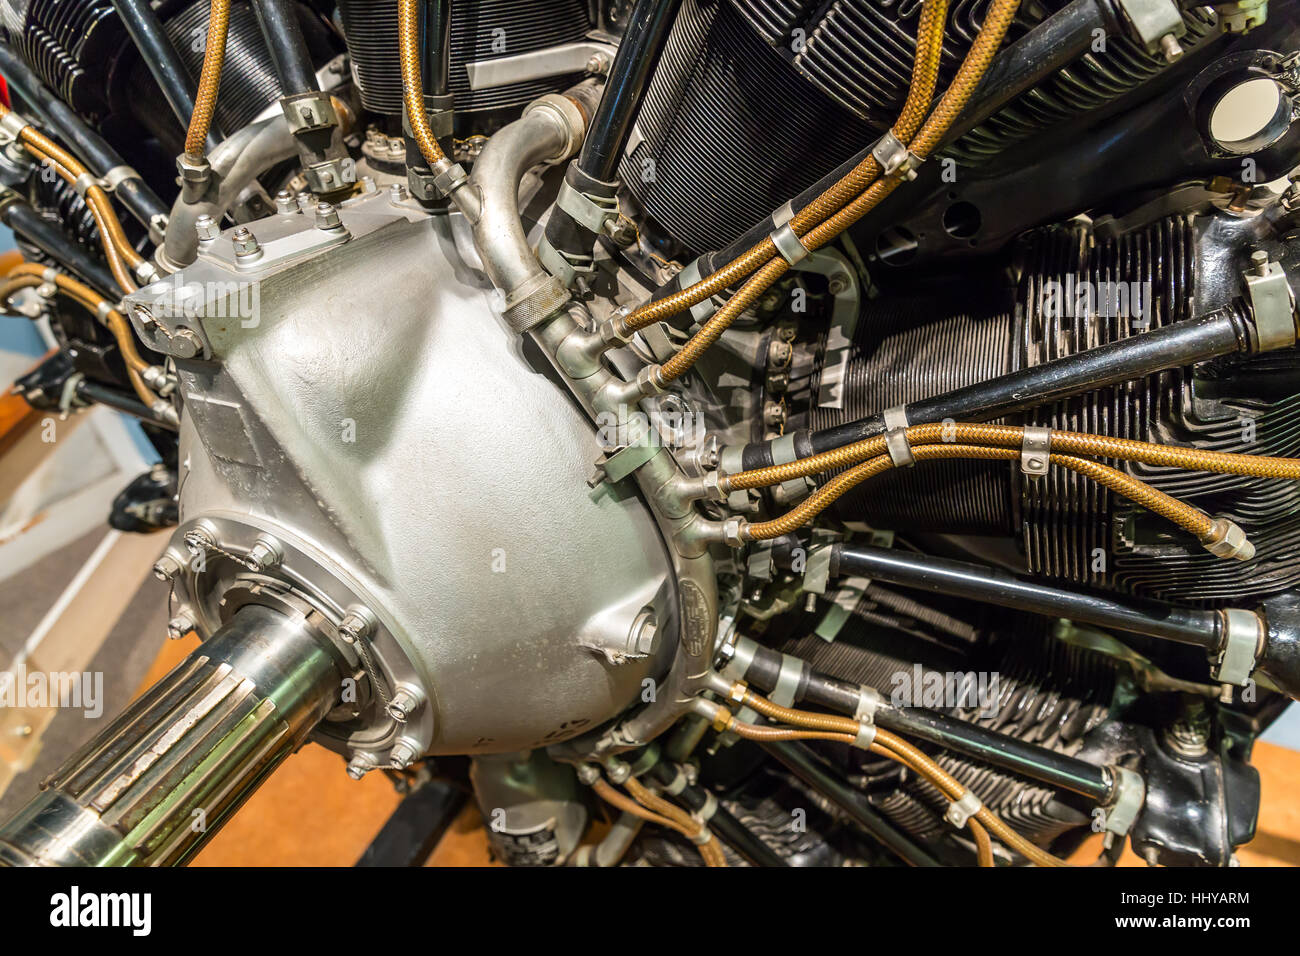 Old aircraft engine Stock Photo